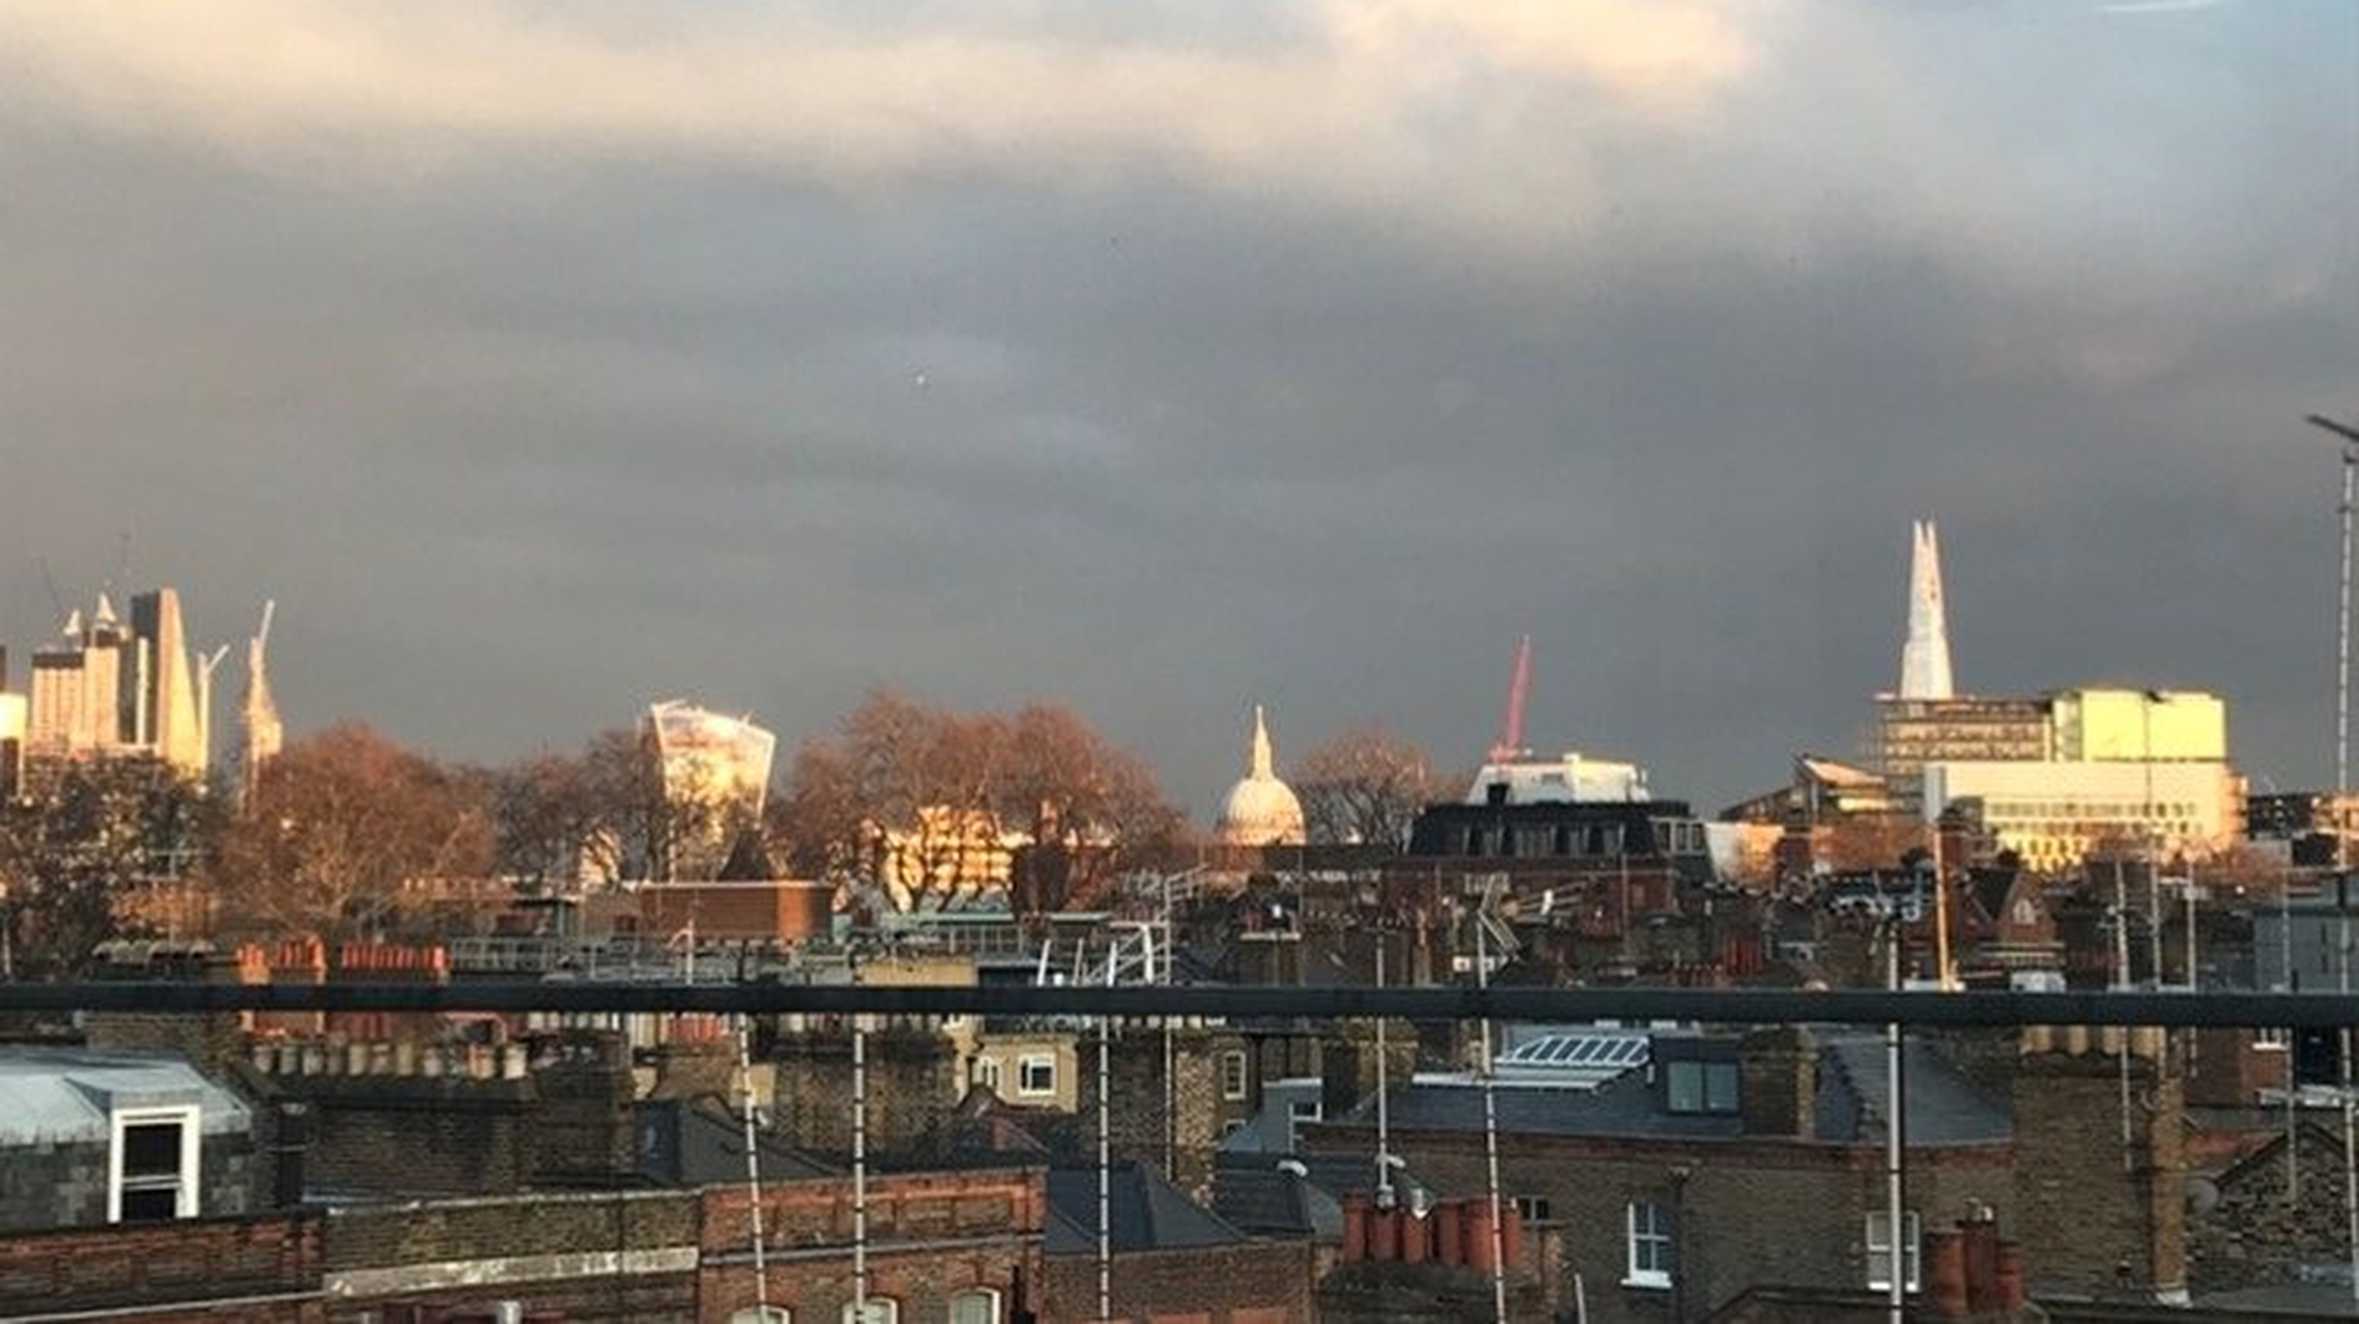 The view of The Shard from GOSH that inspired Angel's wish.